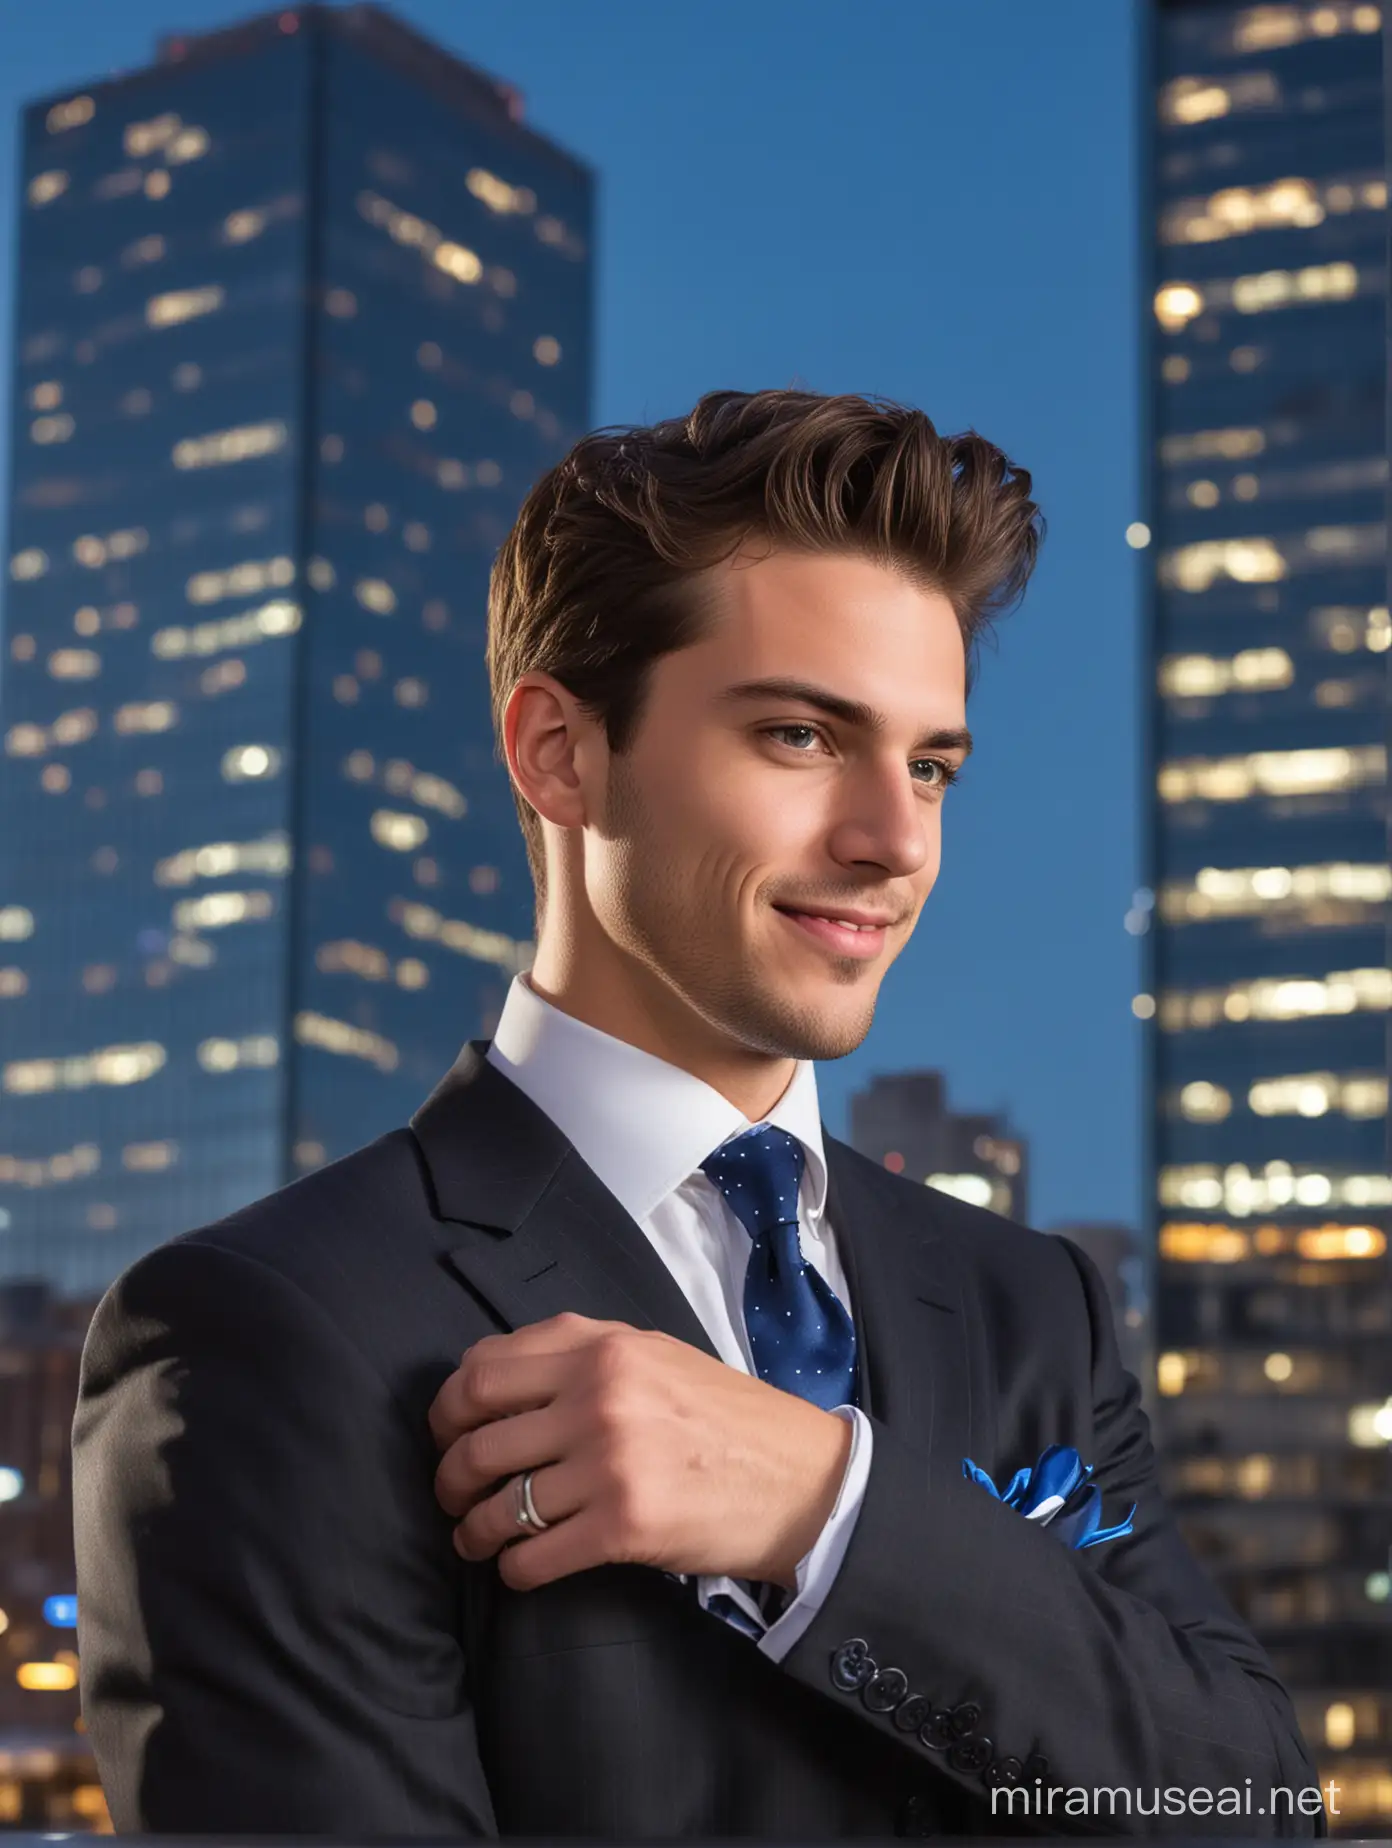 A handsome young man in suit, attending to his cufflinks, with a smirk across his face, and a blue luminous skyscraper behind his back